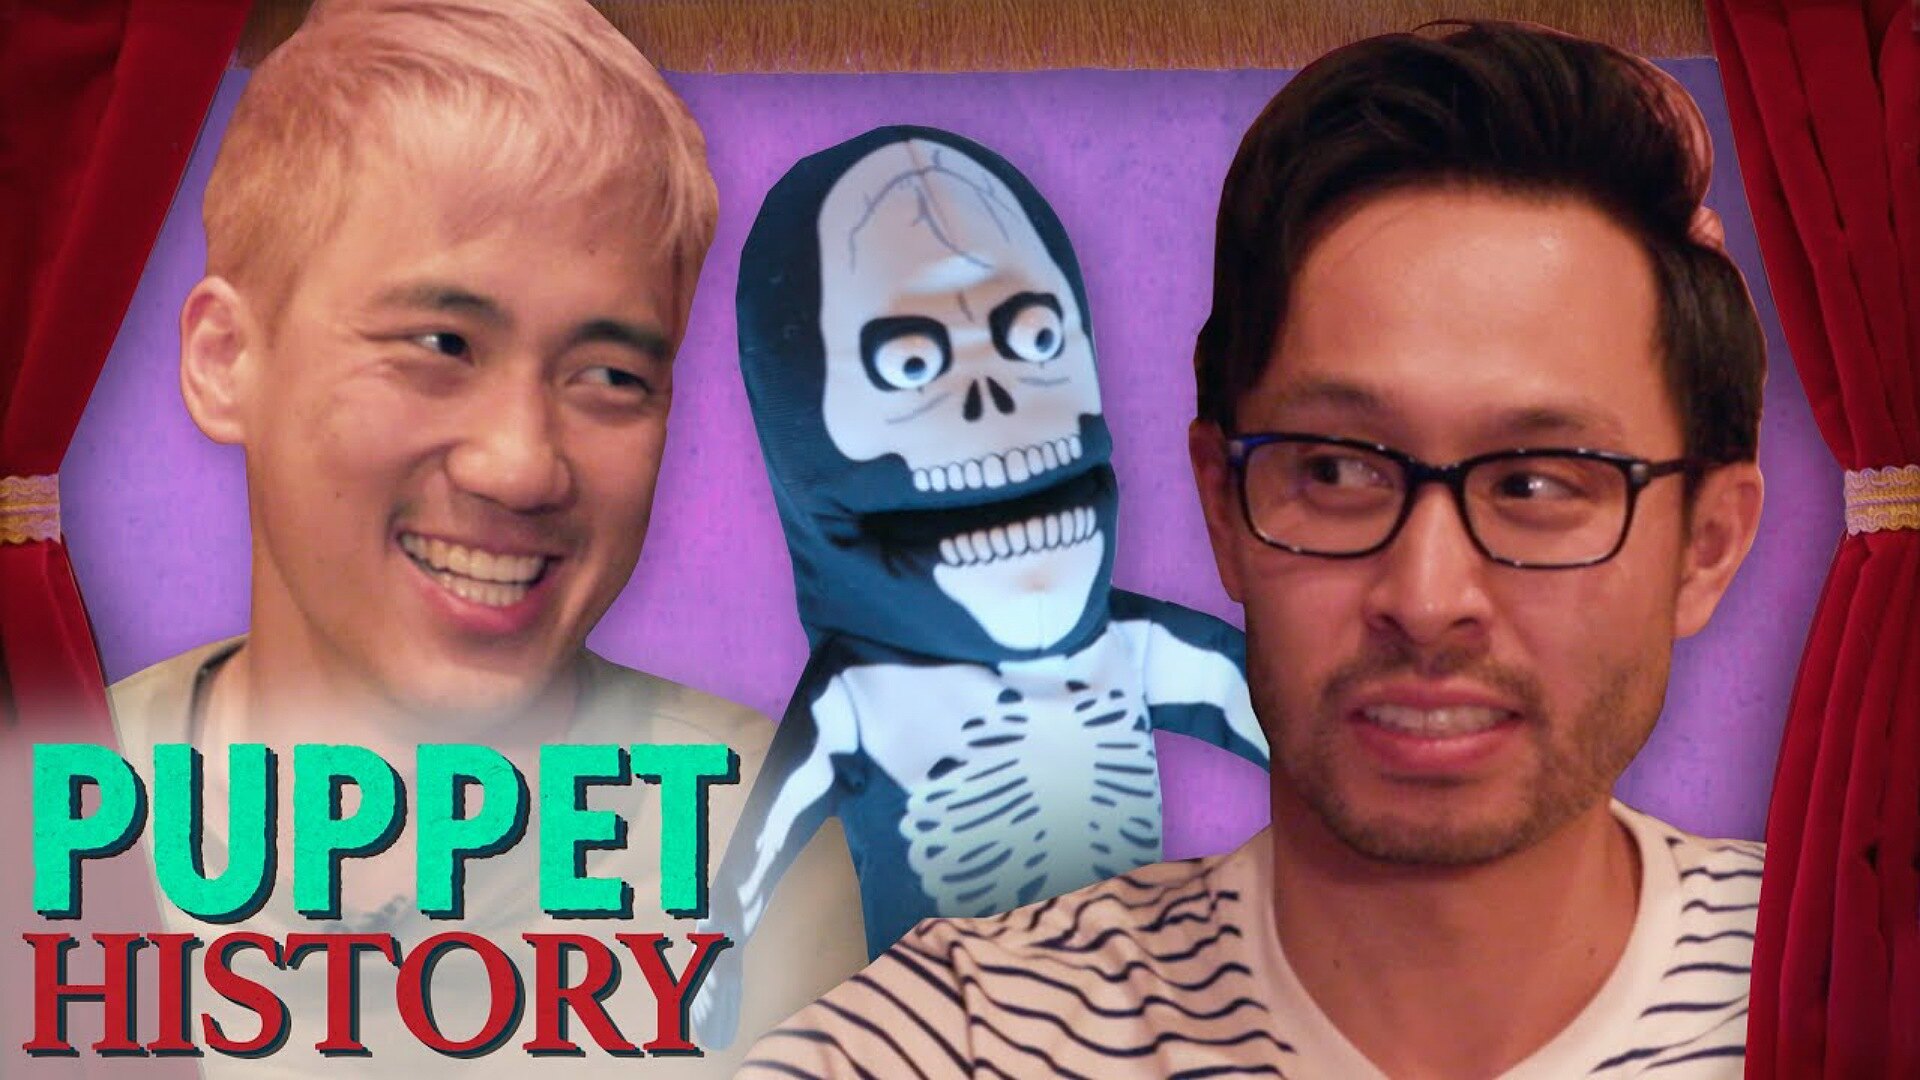 puppet-history-countdown-how-many-days-until-the-next-episode